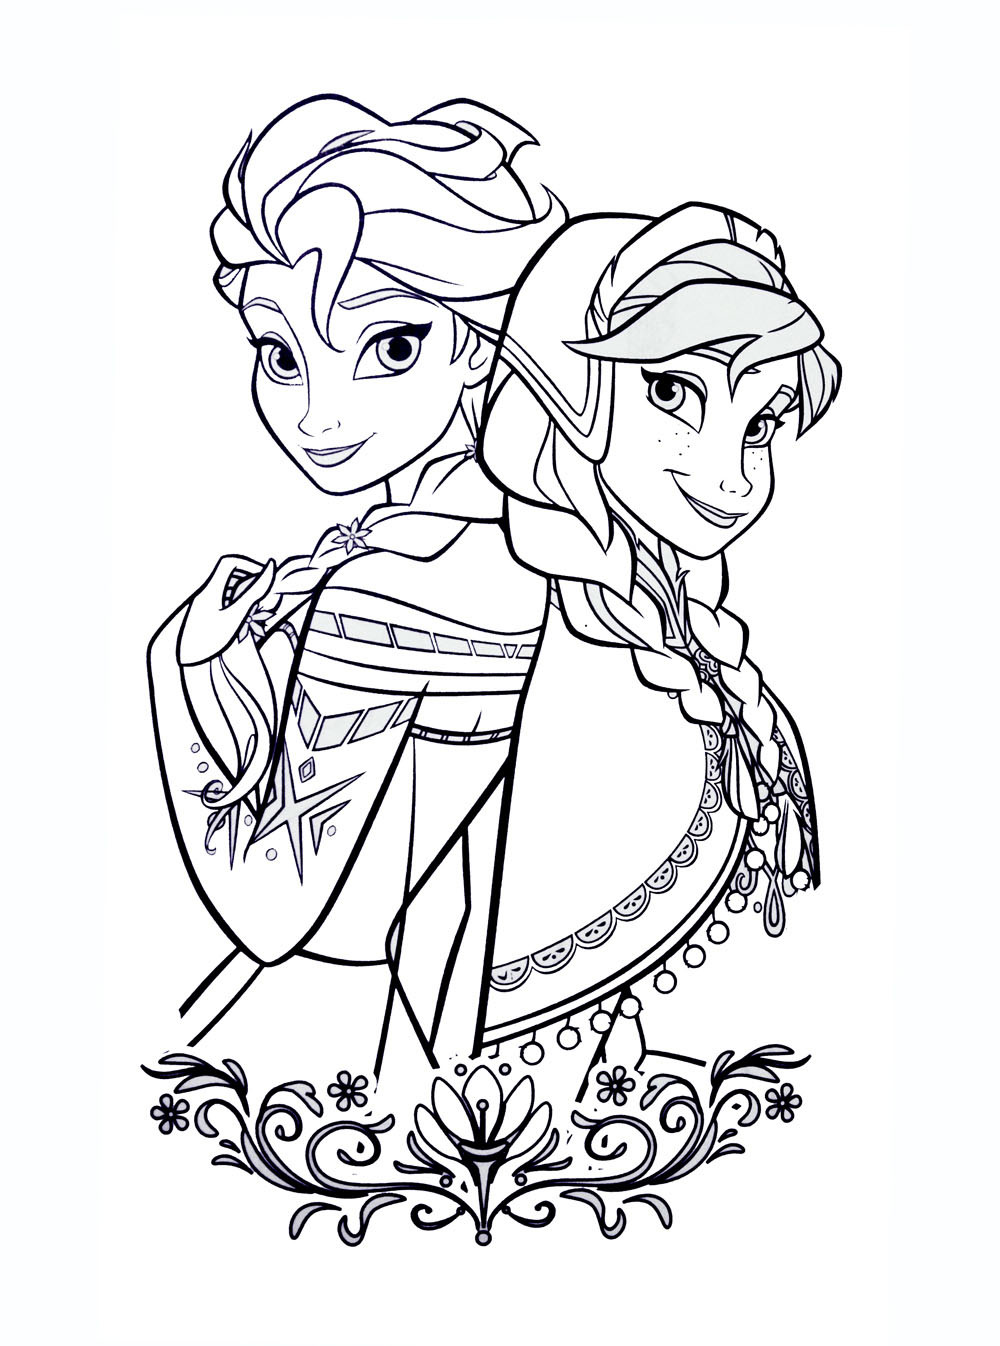 Frozen Coloring Pages For Toddlers
 Frozen free to color for kids Frozen Kids Coloring Pages